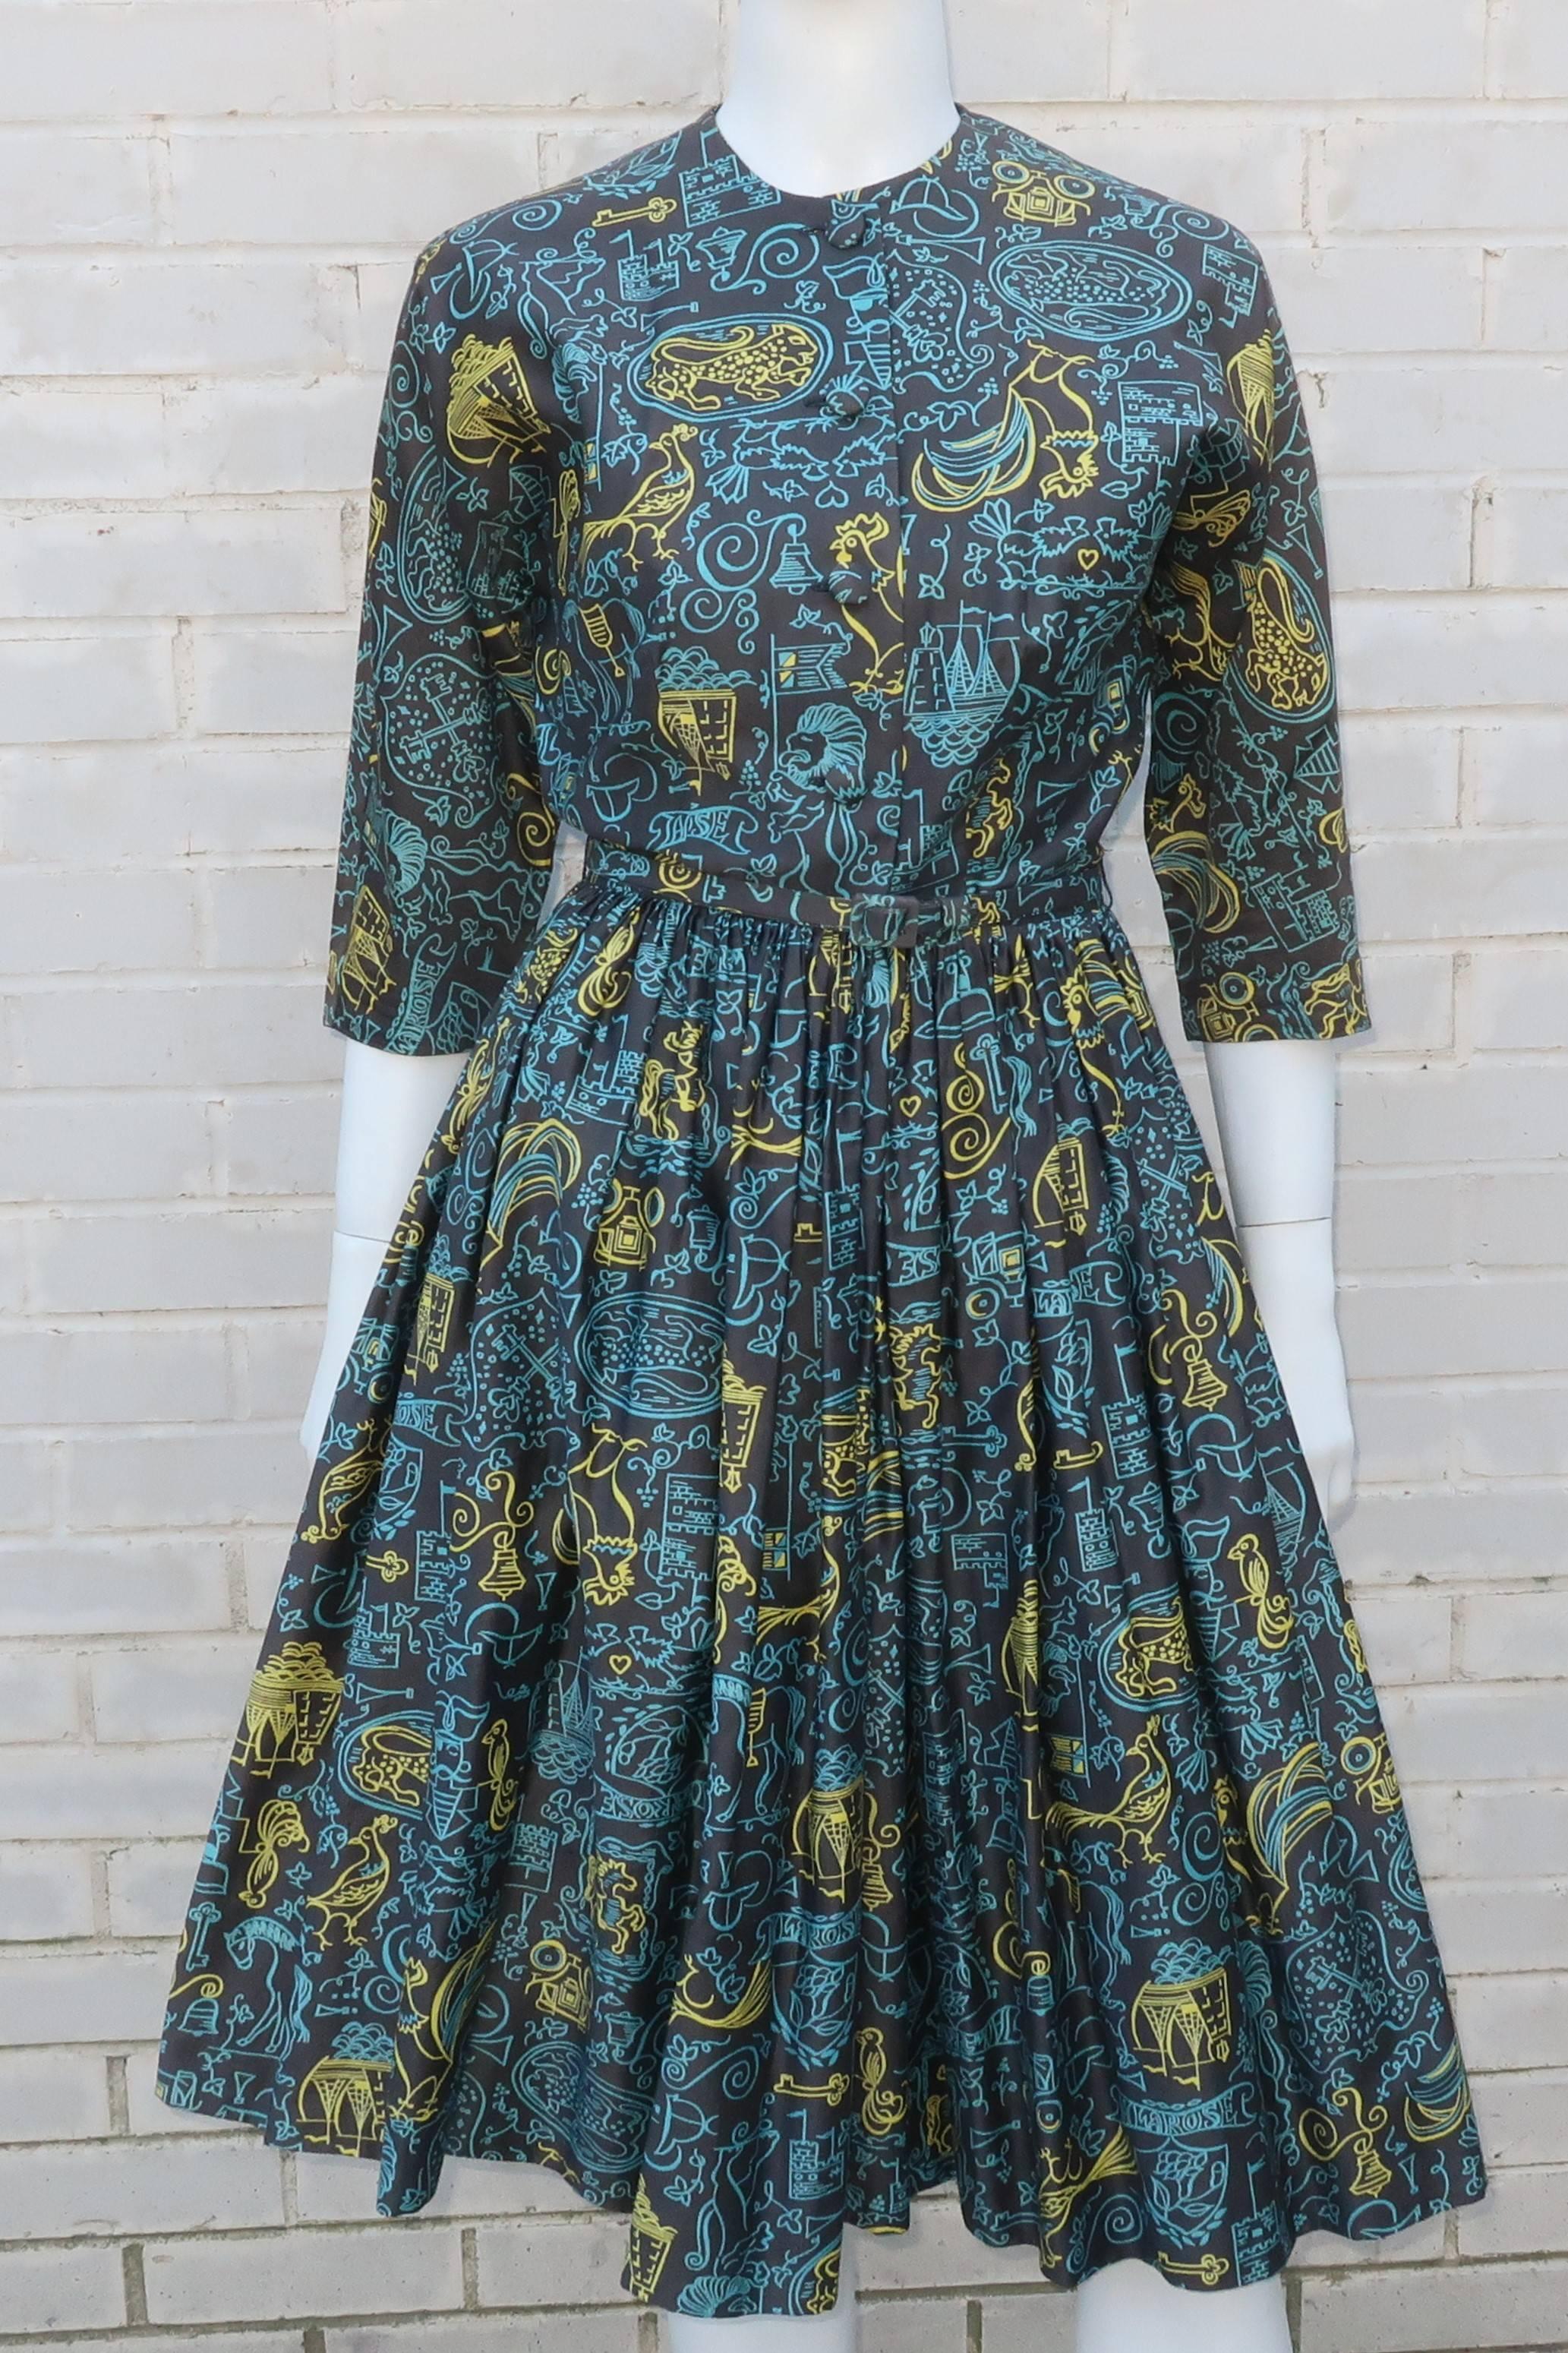 Crisp and neat as a pin!  This classic 1950's shirt dress buttons and hooks at the front with batwing style 3/4 sleeves, a coordinating skinny belt and a full skirt.  The novelty printed polished cotton fabric depicts English castles, ships,